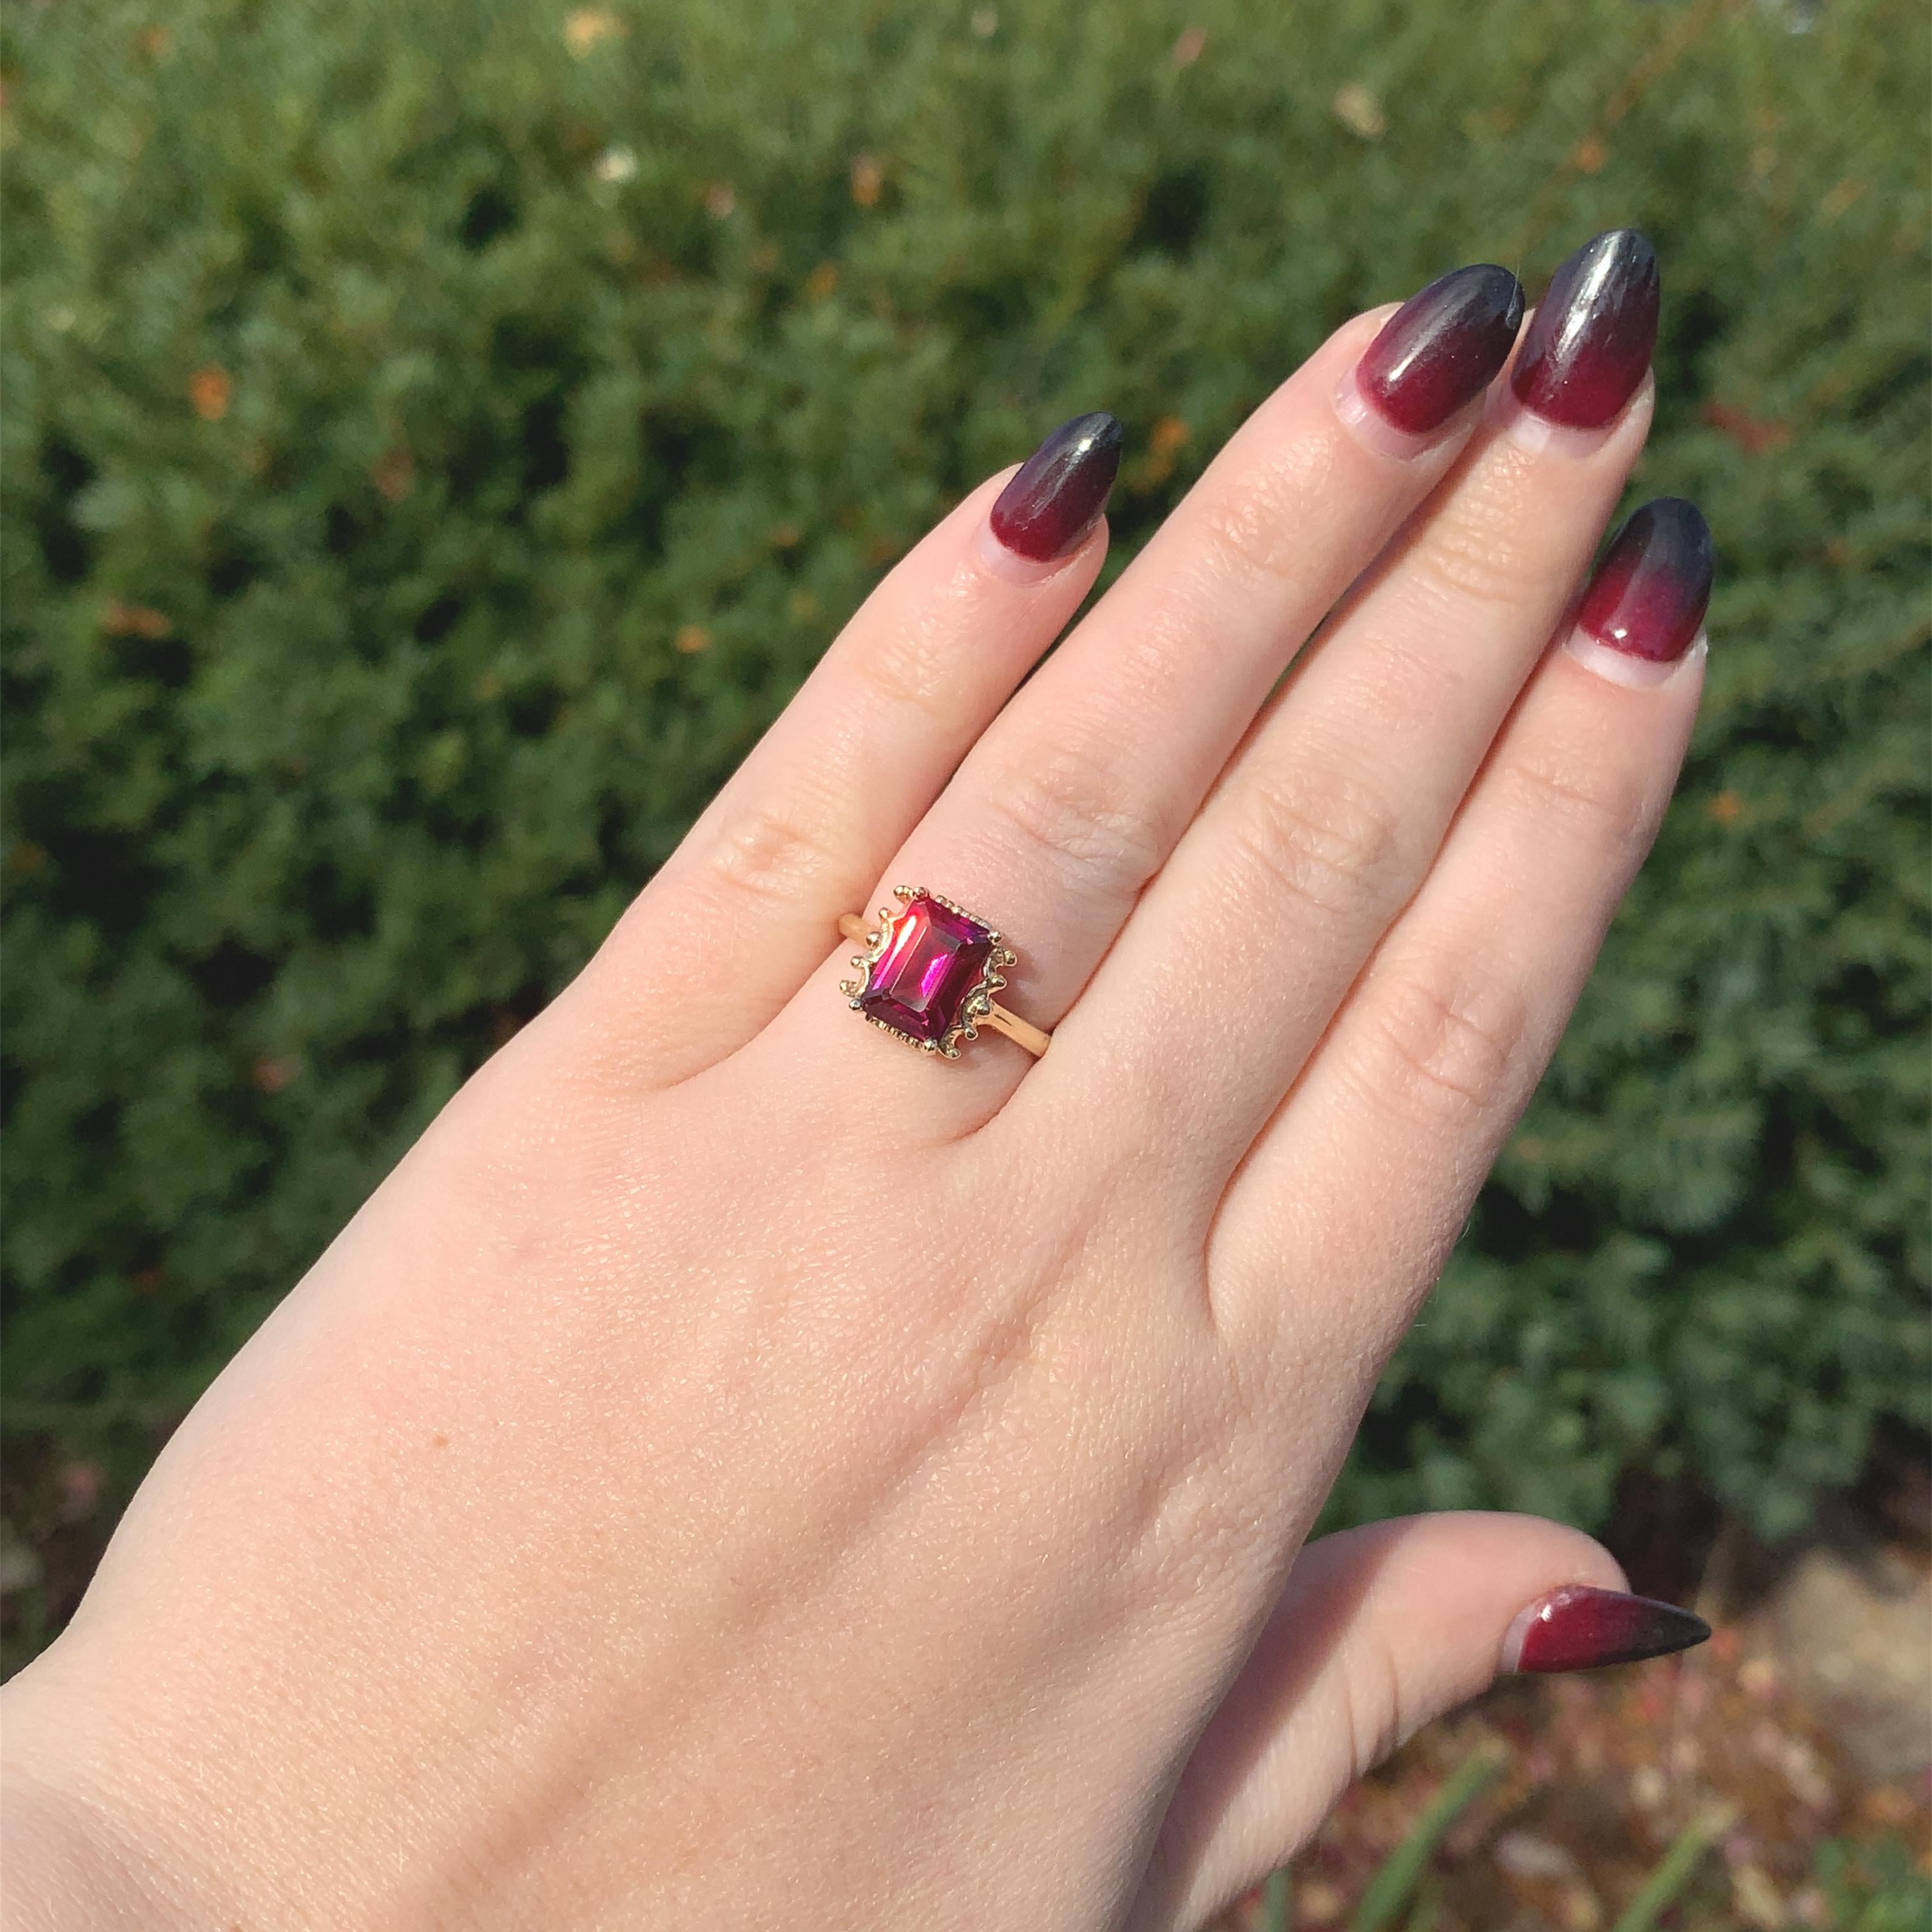 For Sale:  14K Yellow Gold Ring with Emerald Cut 3.51 carat Rhodolite Garnet 6